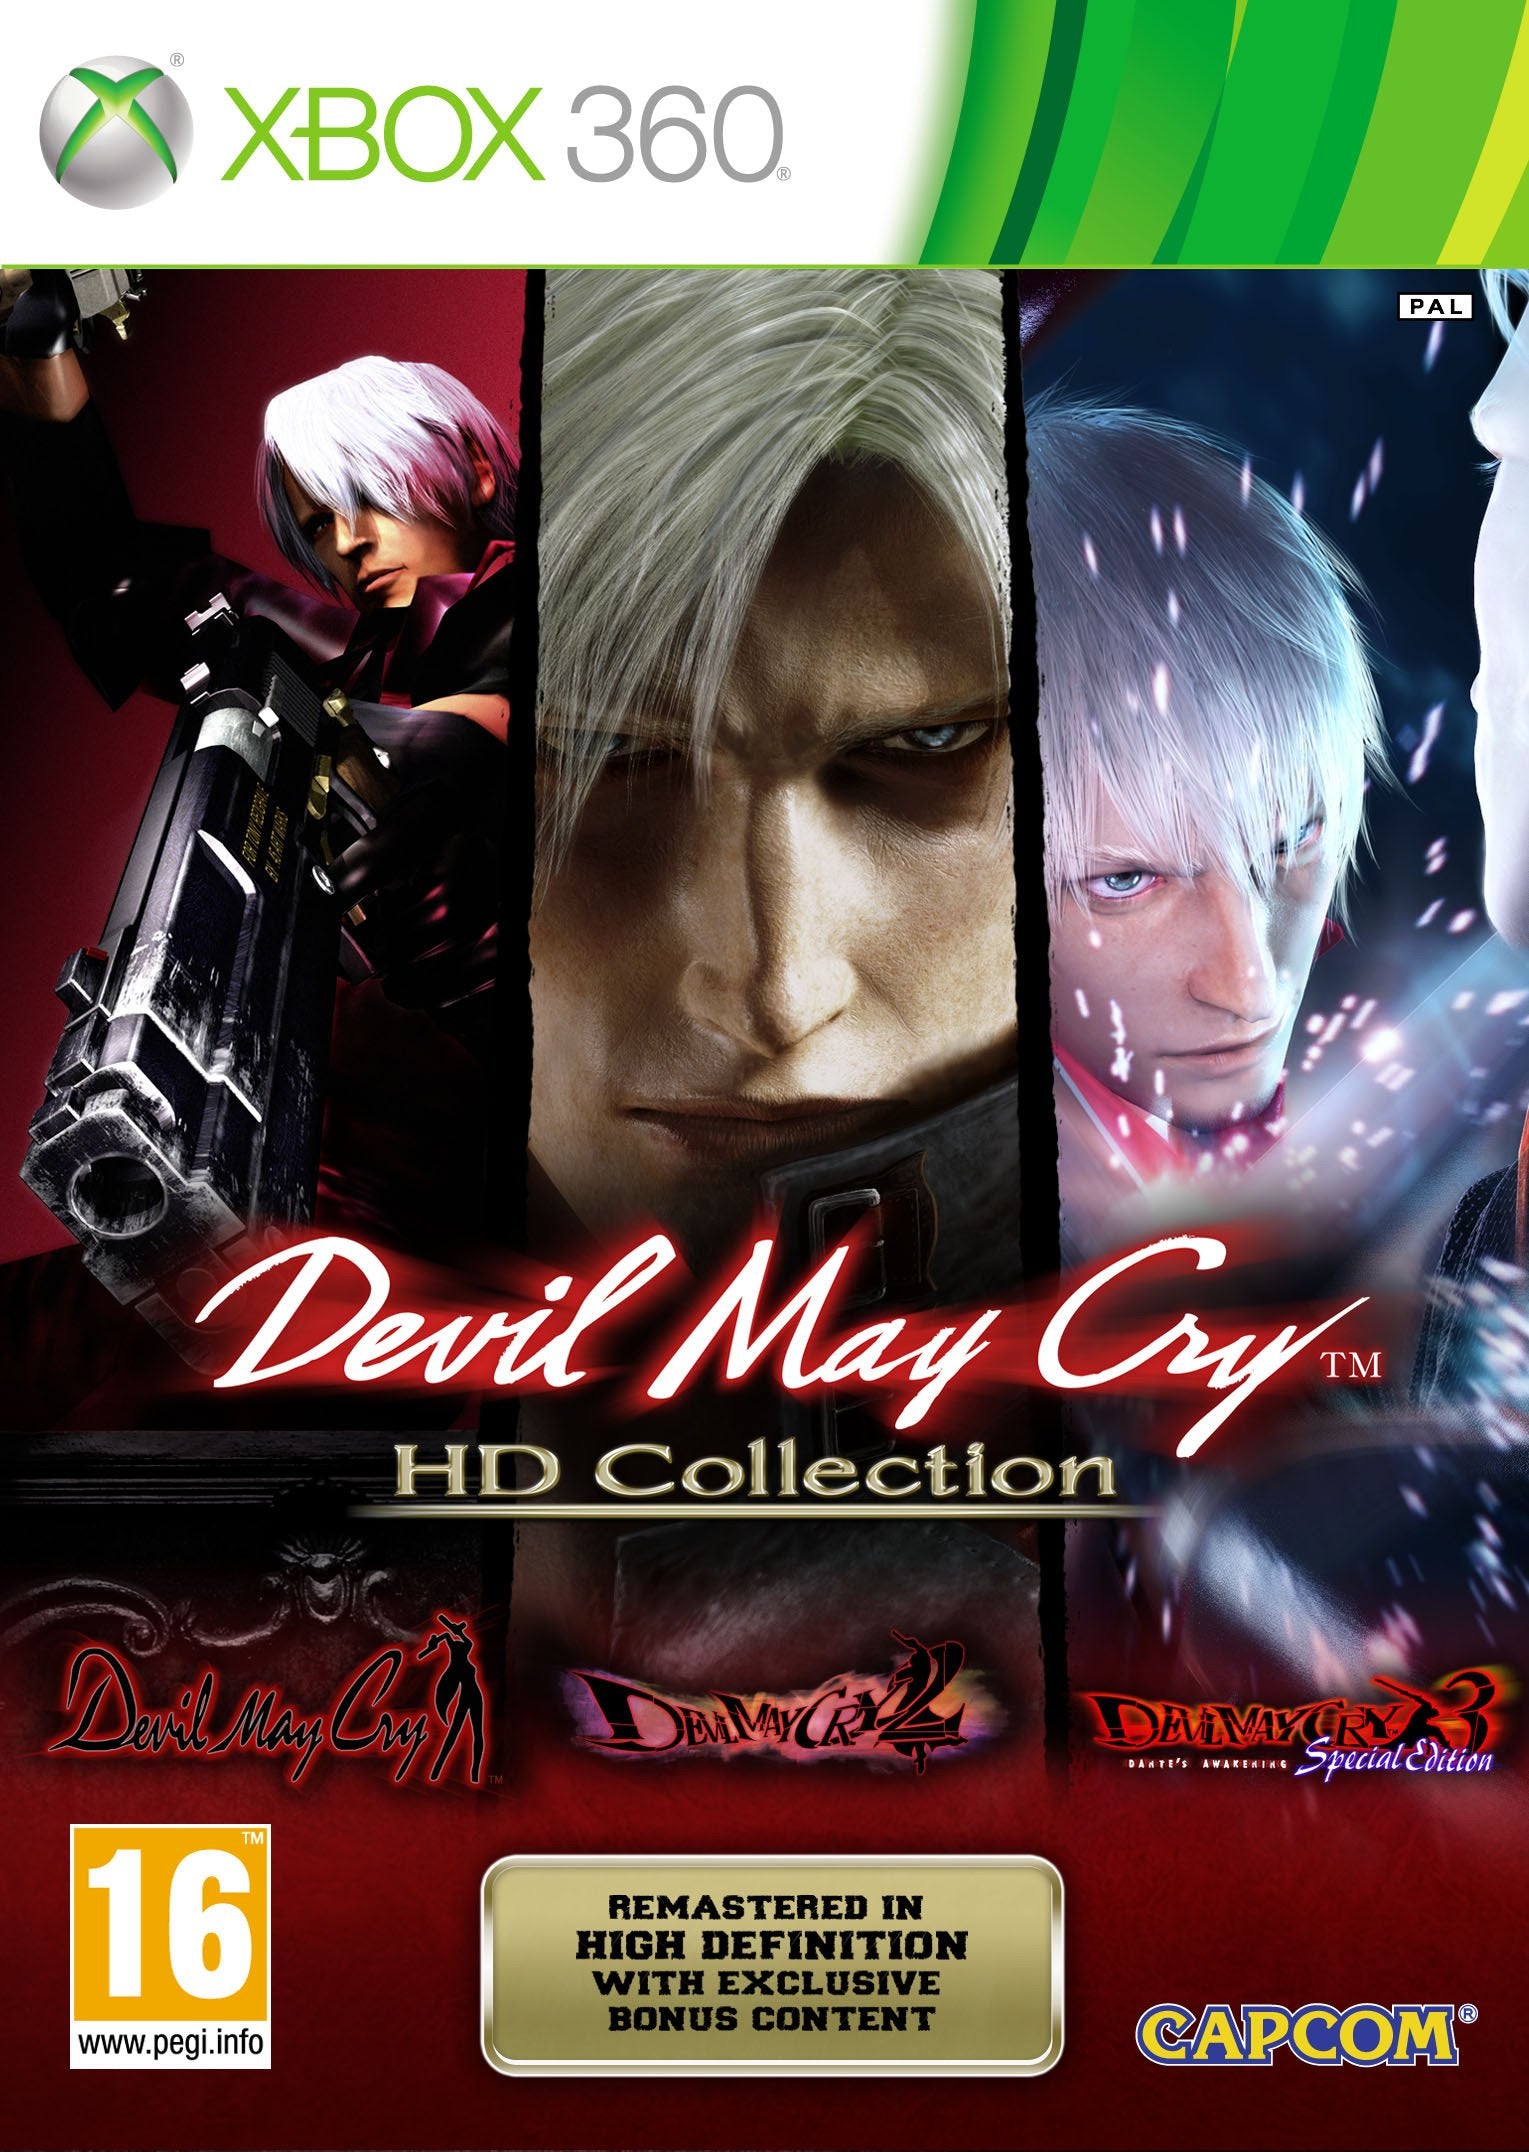 Game | Microsoft Xbox 360 | Devil May Cry HD Collection